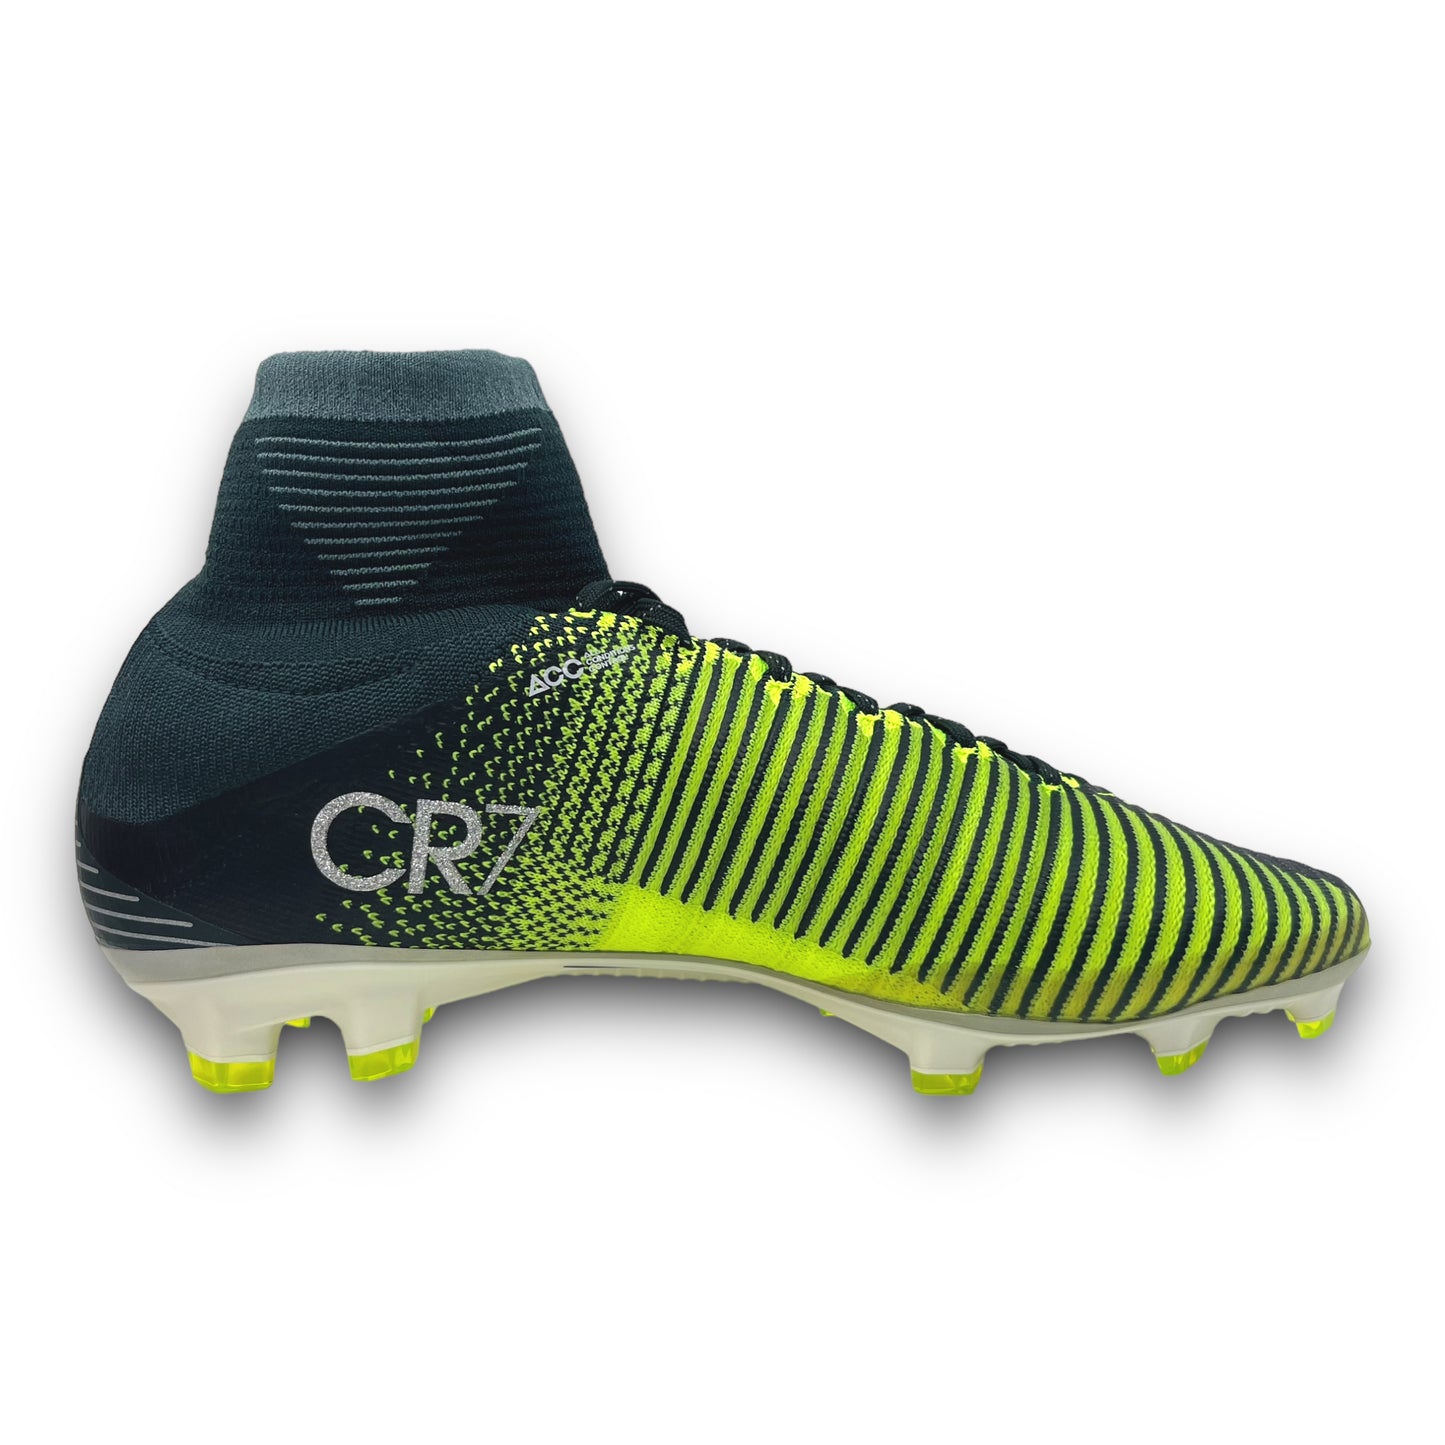 Nike Mercurial Superfly 5 FG CR7 "Discovery Pack"